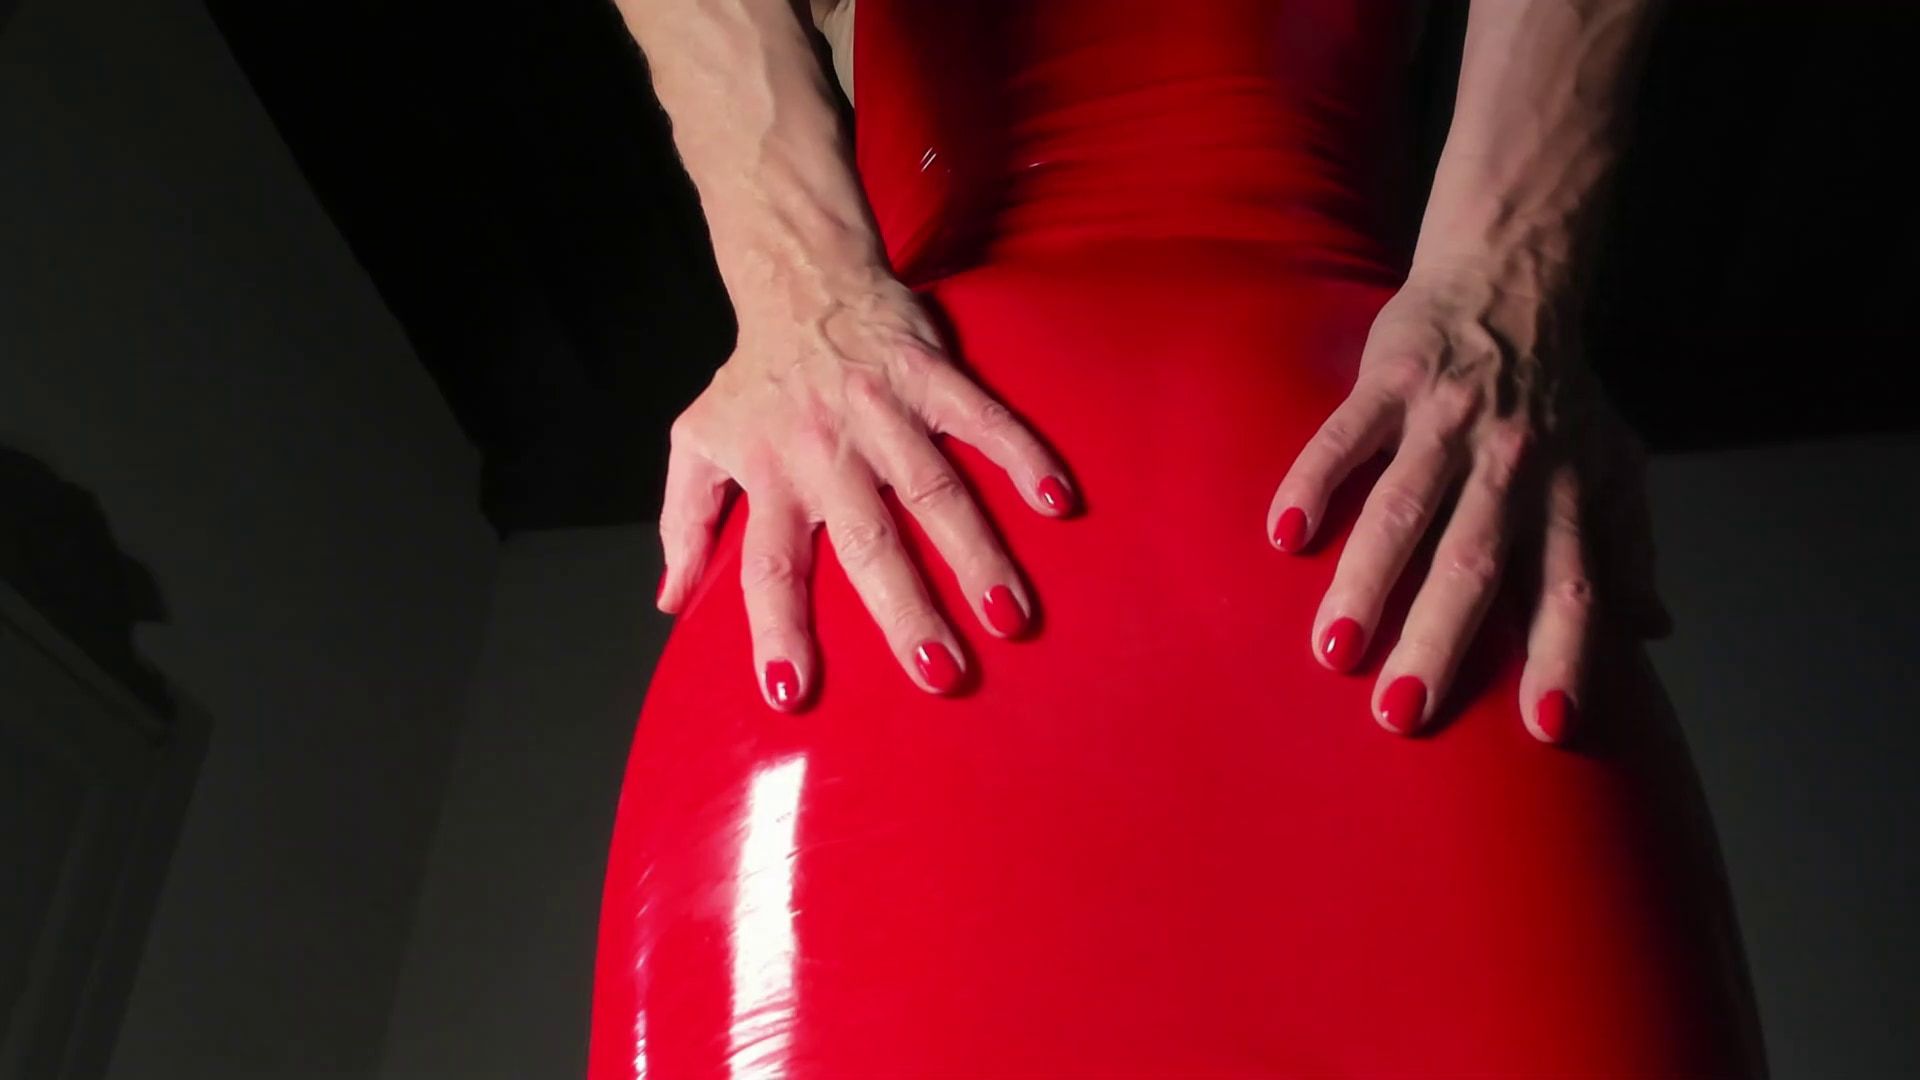 Ass flash in red latex